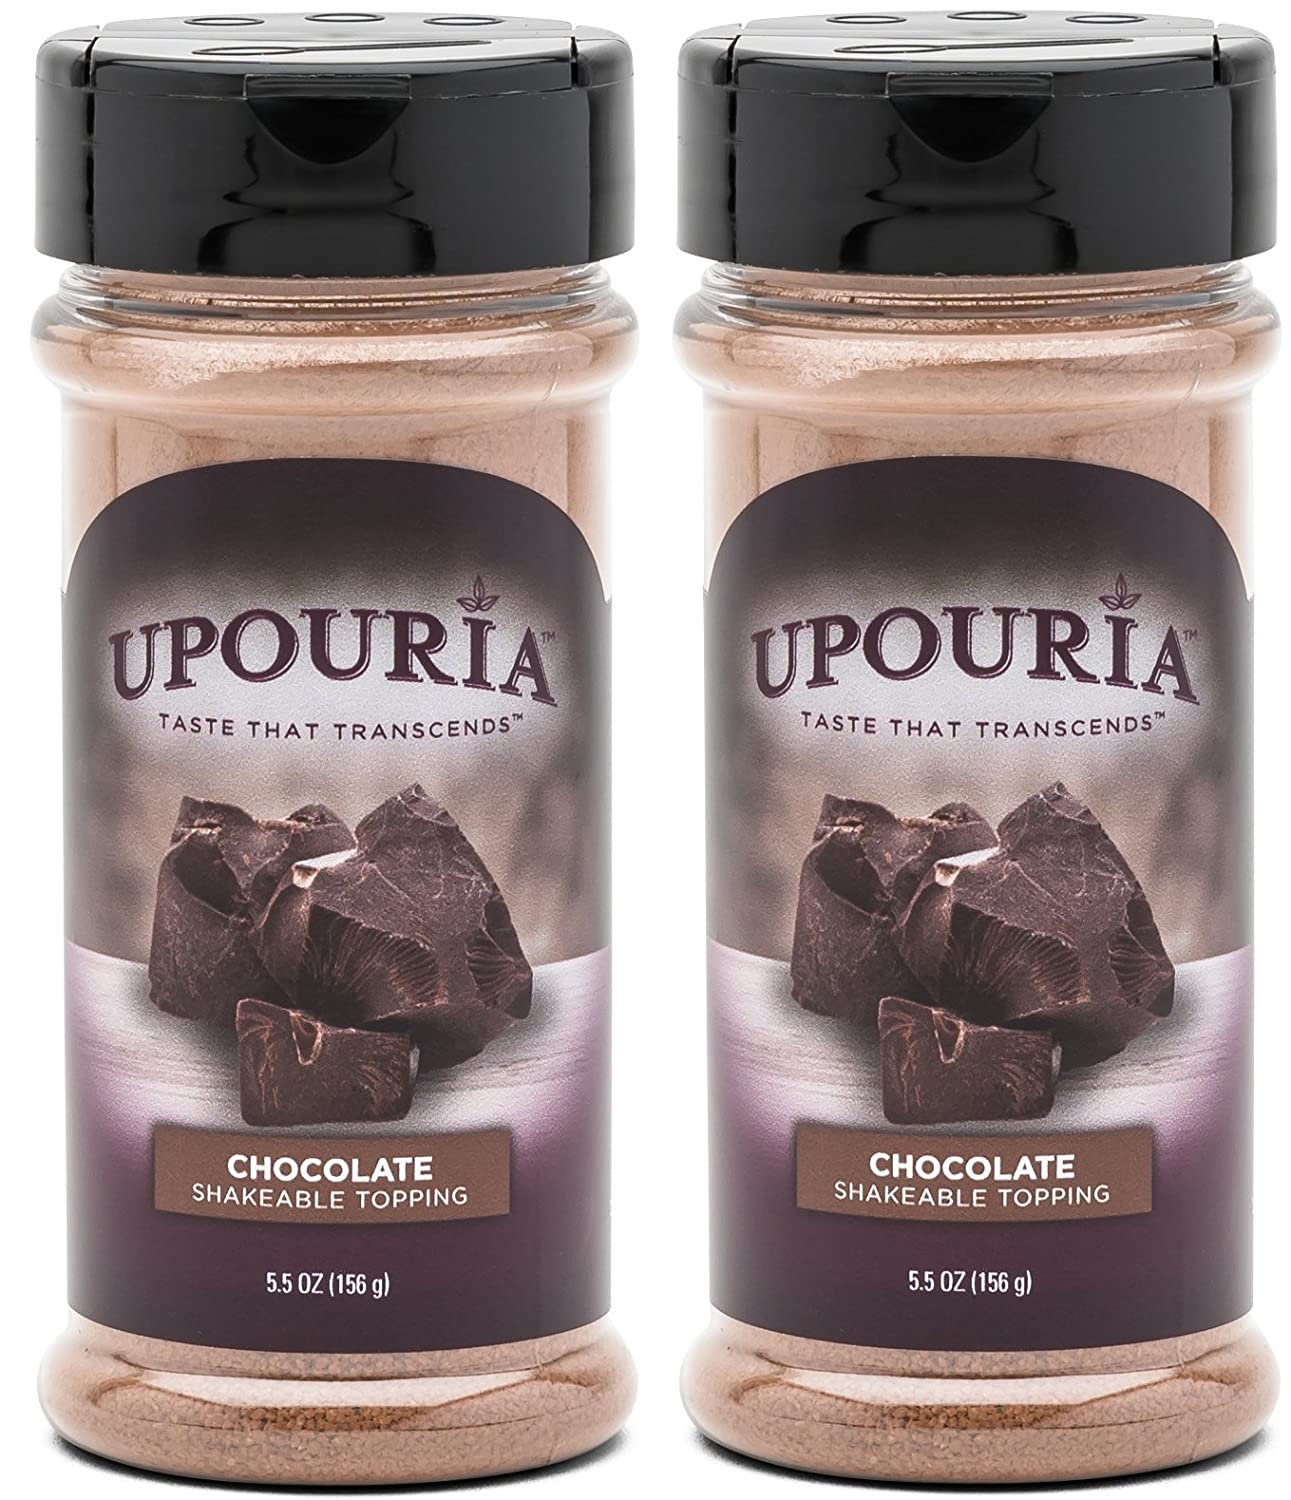 Upouria Coffee Topping Variety Pack - Chocolate and French Vanilla 5.5  Ounce Shakeable Topping Jars - (Pack of 2)